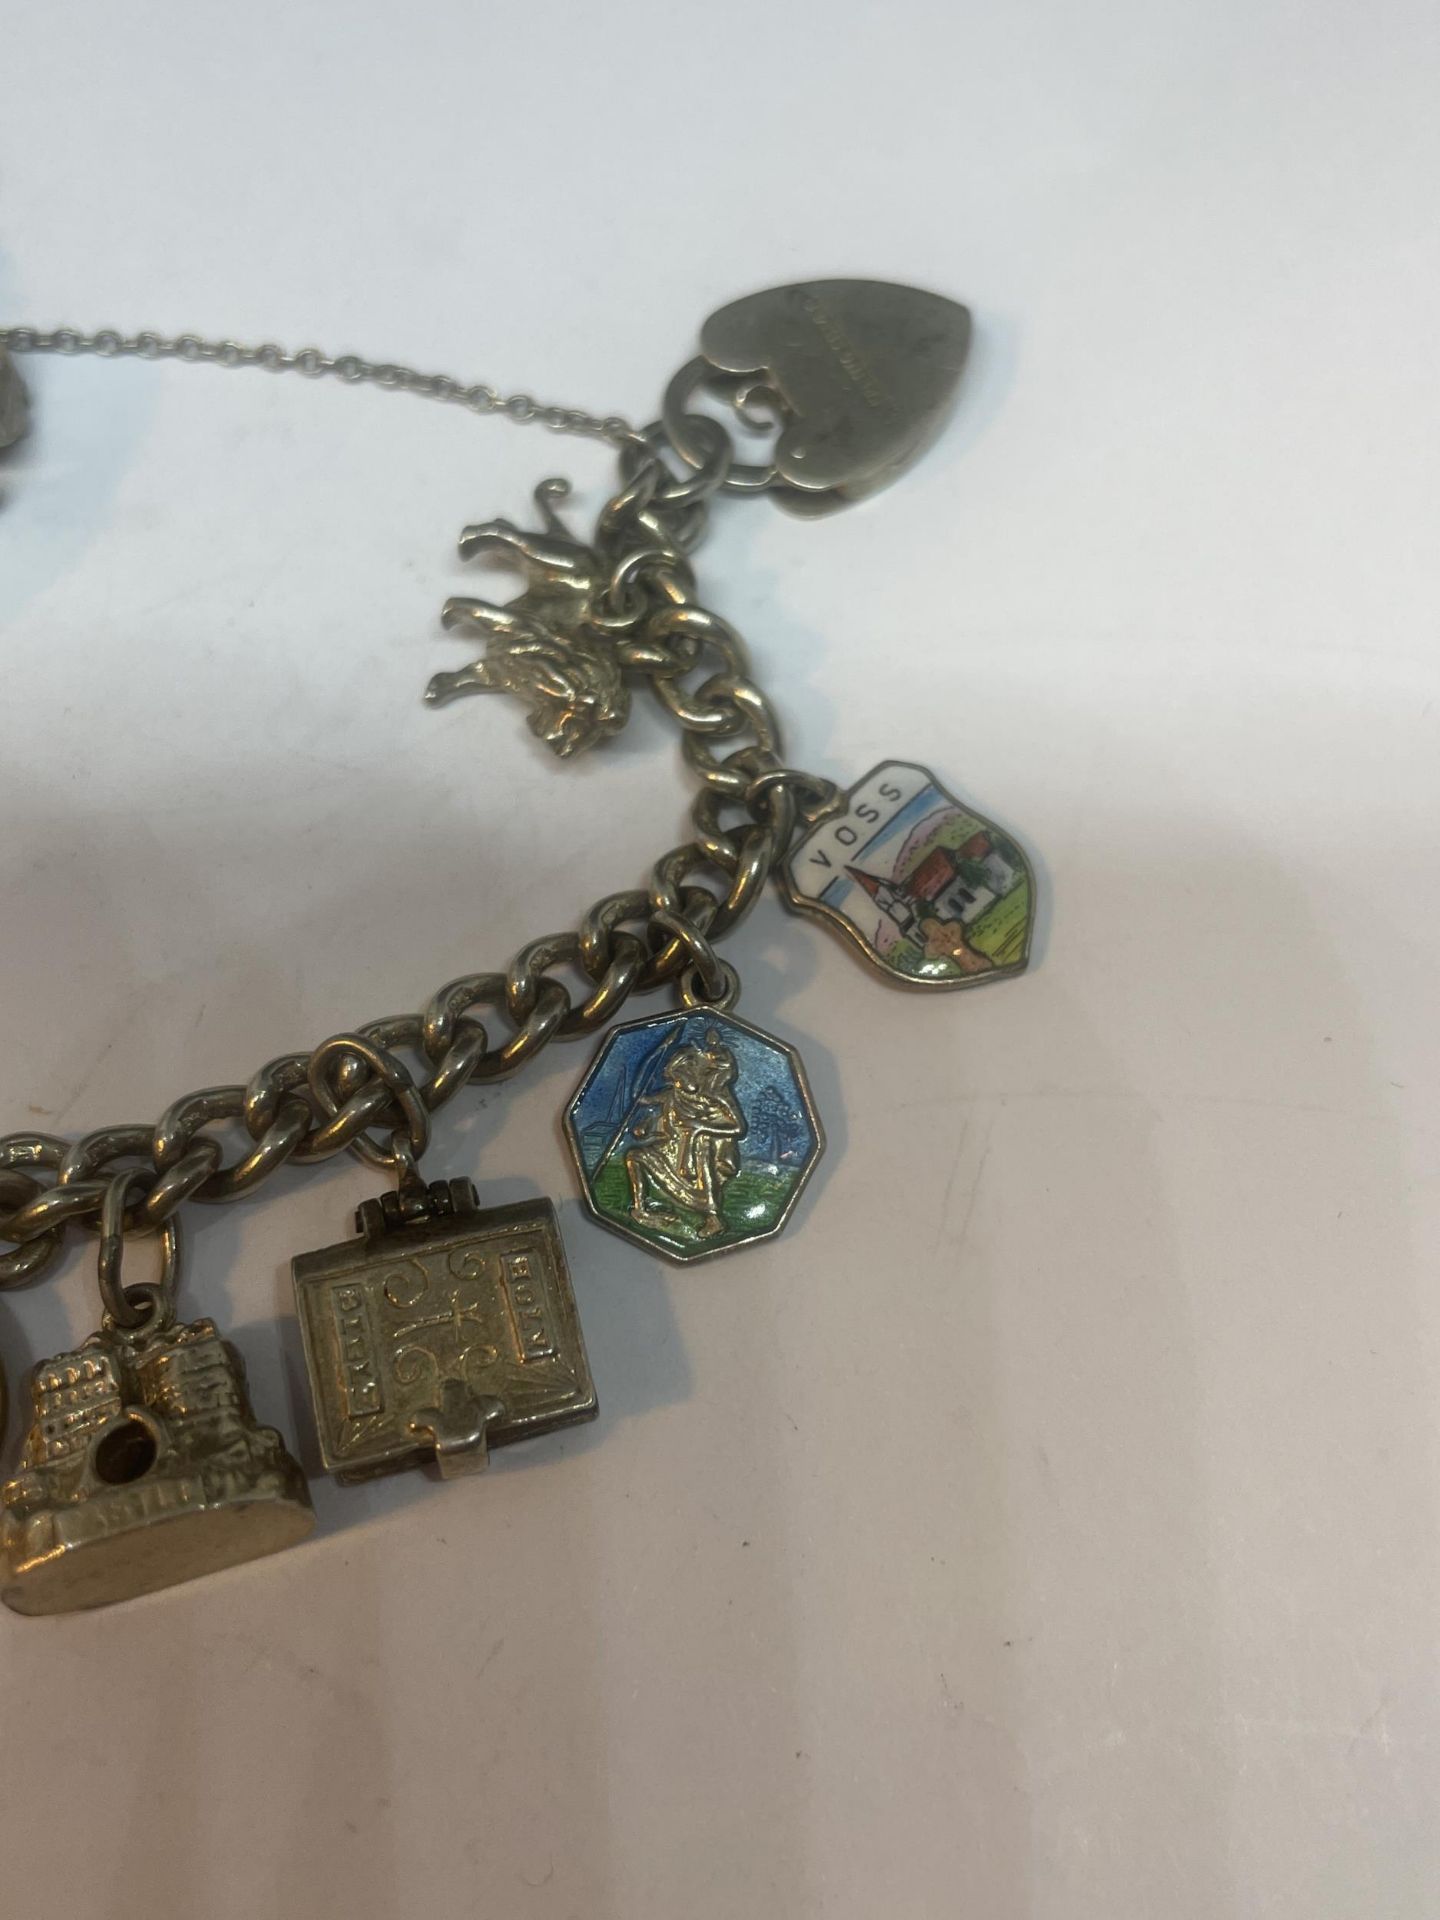 A SILVER CHARM BRACELET WITH FIFTEEN CHARMS AND A HEART PADLOCK - Image 4 of 4